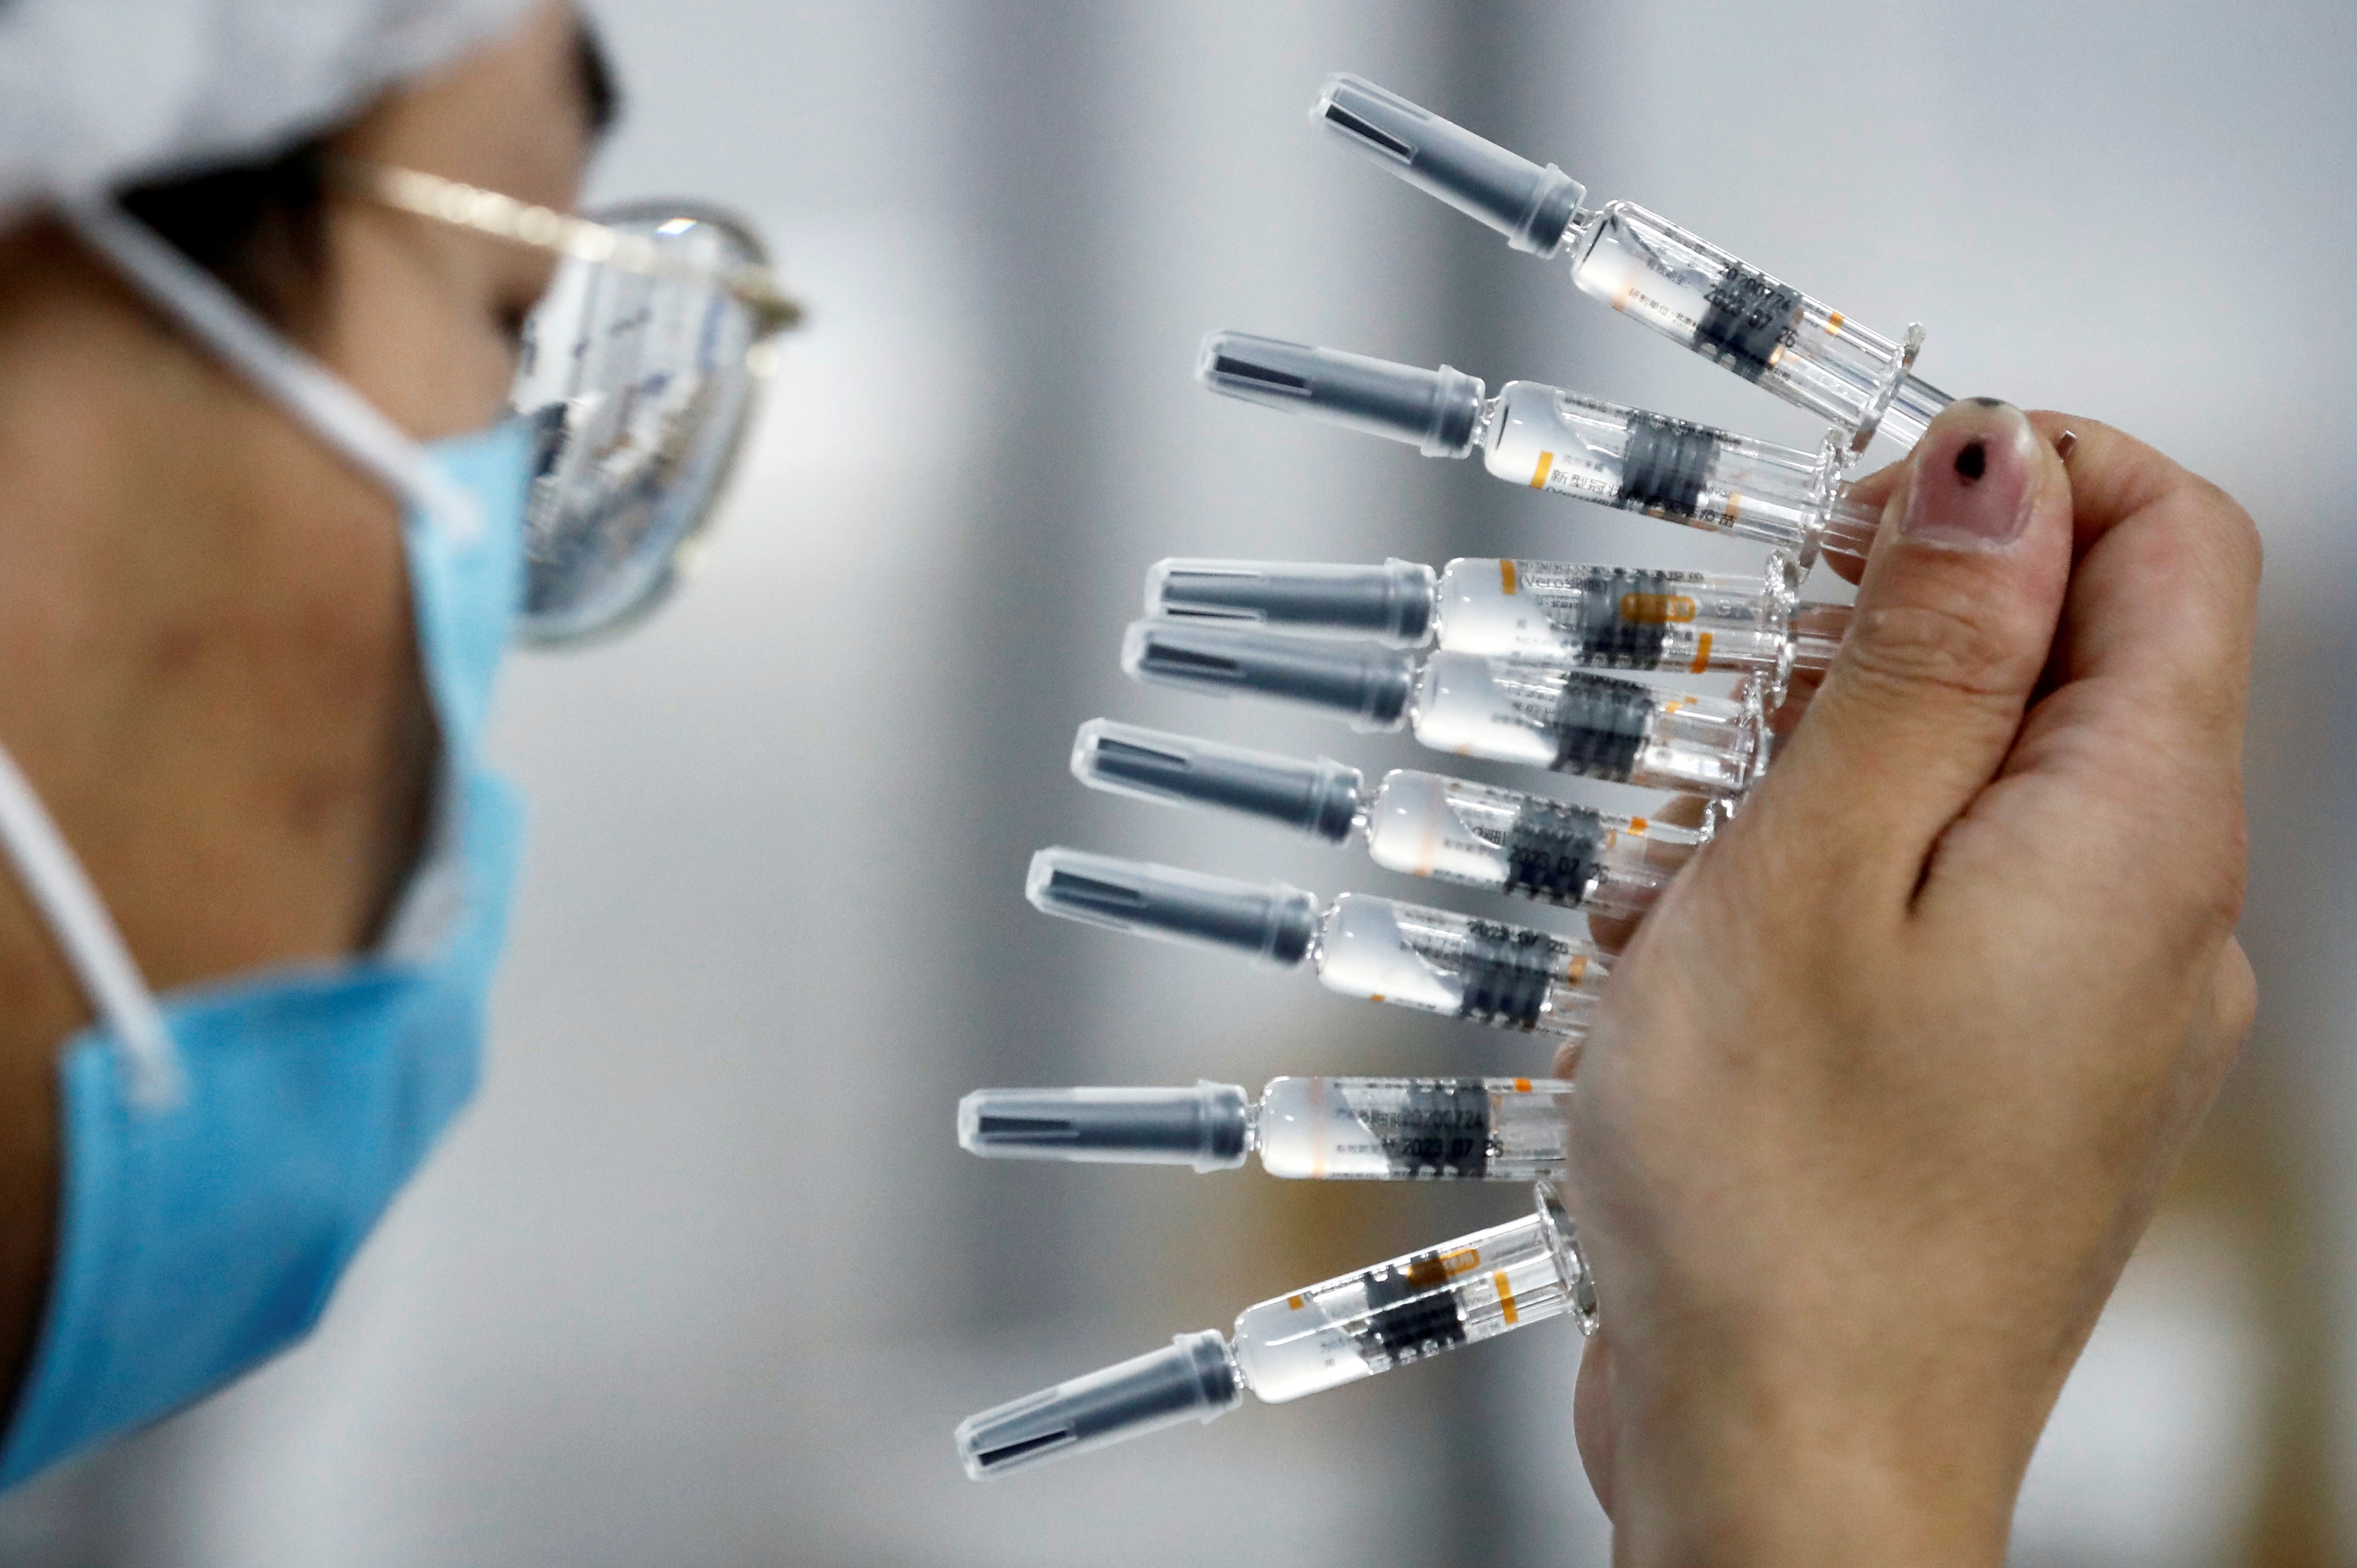 A worker performs a quality check in the packaging facility of Chinese vaccine maker Sinovac Biotech, developing an experimental coronavirus disease (COVID-19) vaccine, during a government-organized media tour in Beijing, China, September 24, 2020. REUTERS/Thomas Peter/File Photo